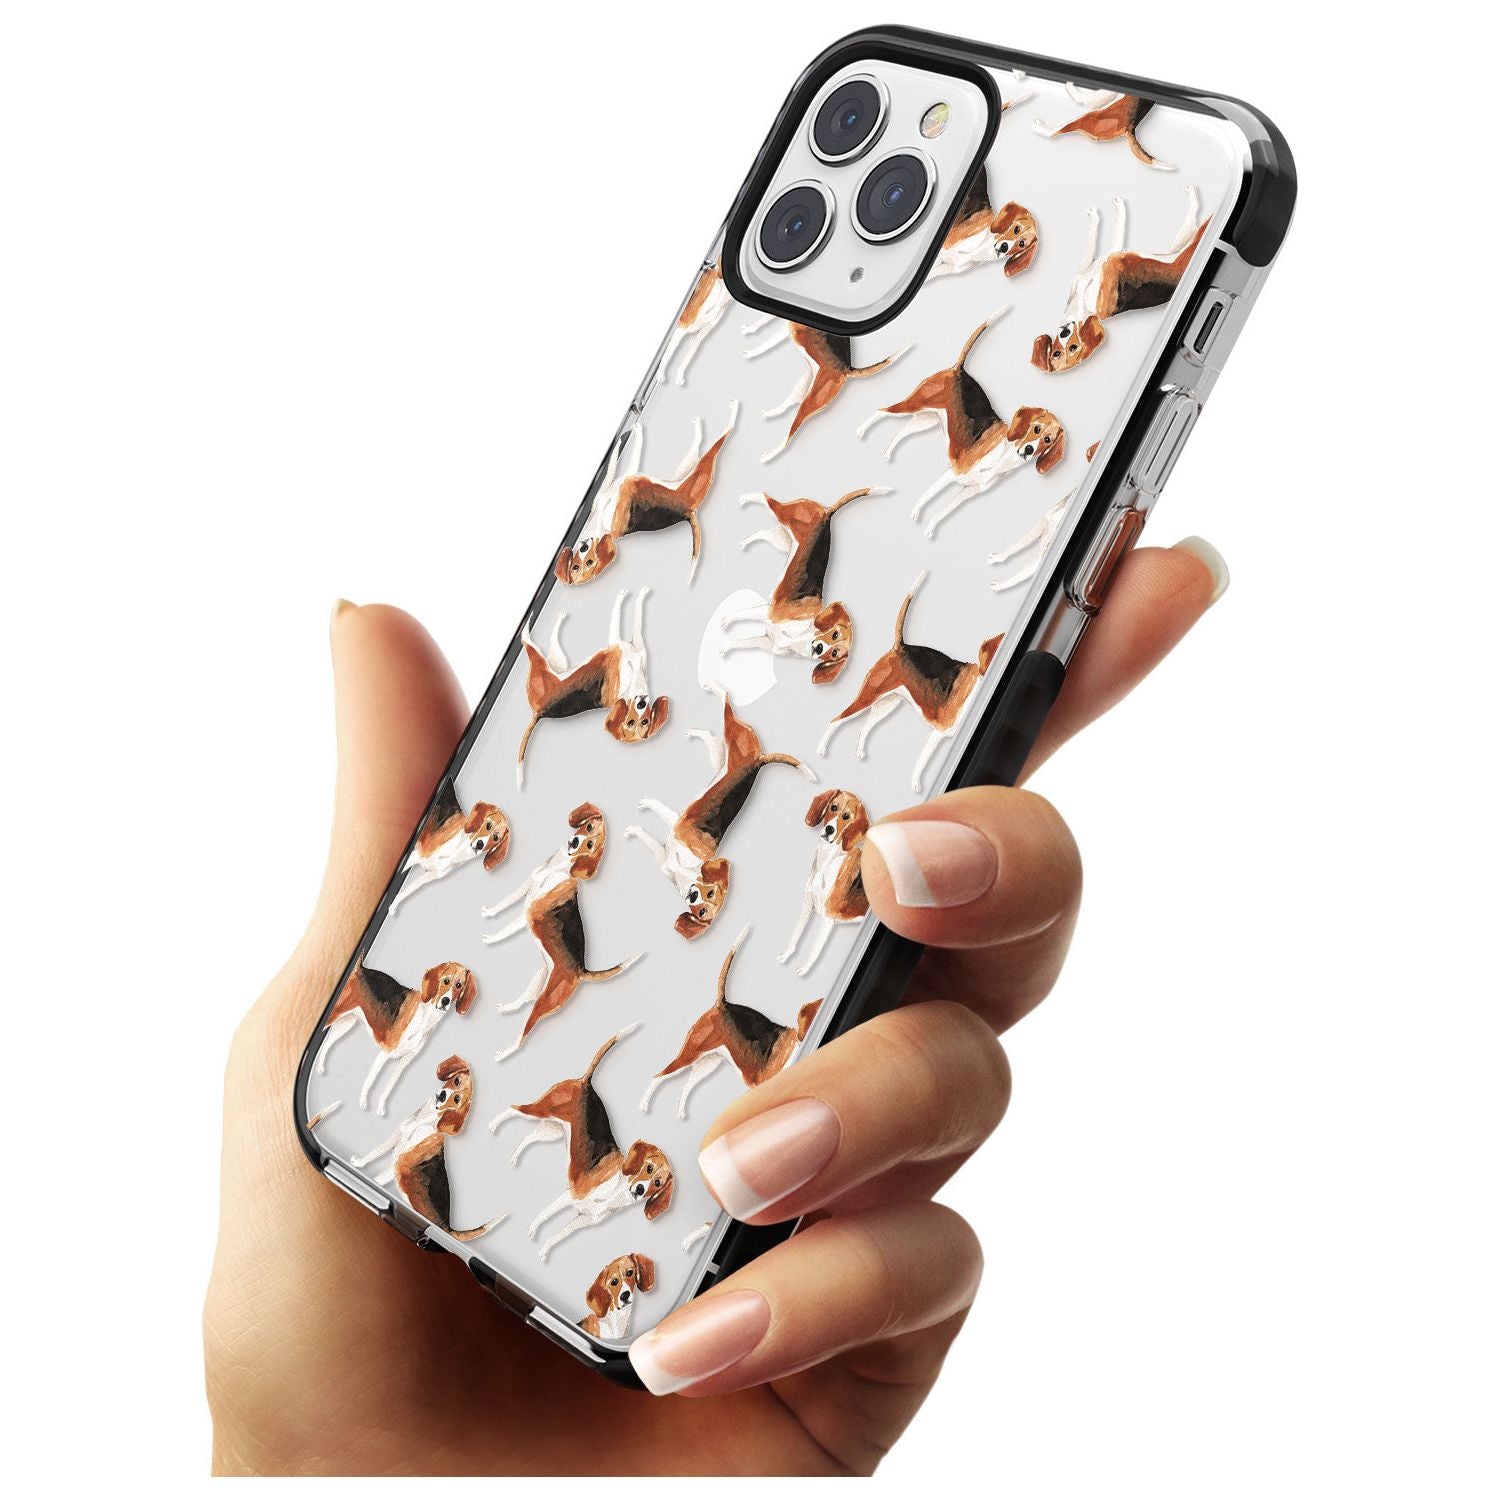 Beagle Watercolour Dog Pattern Black Impact Phone Case for iPhone 11 Pro Max